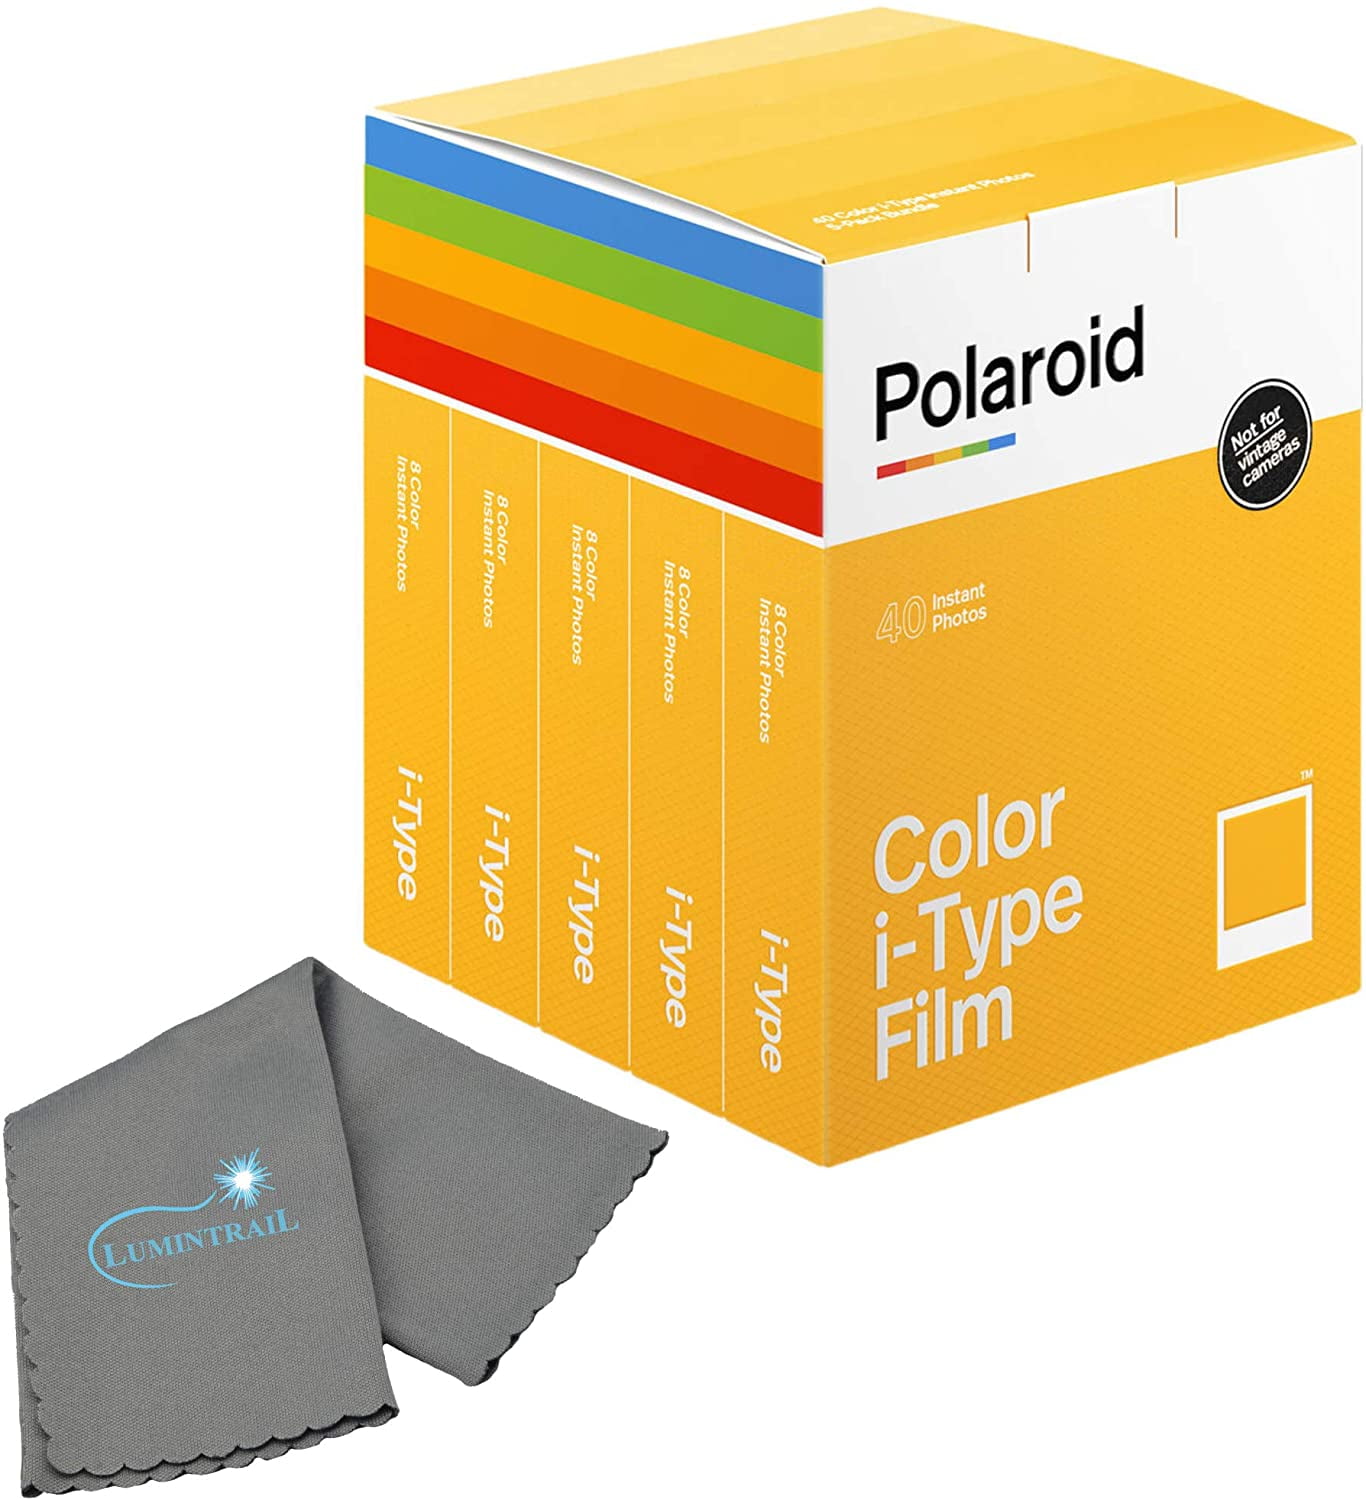 Polaroid I-Type Film Variety Pack - Color + B&W (2 Pack)